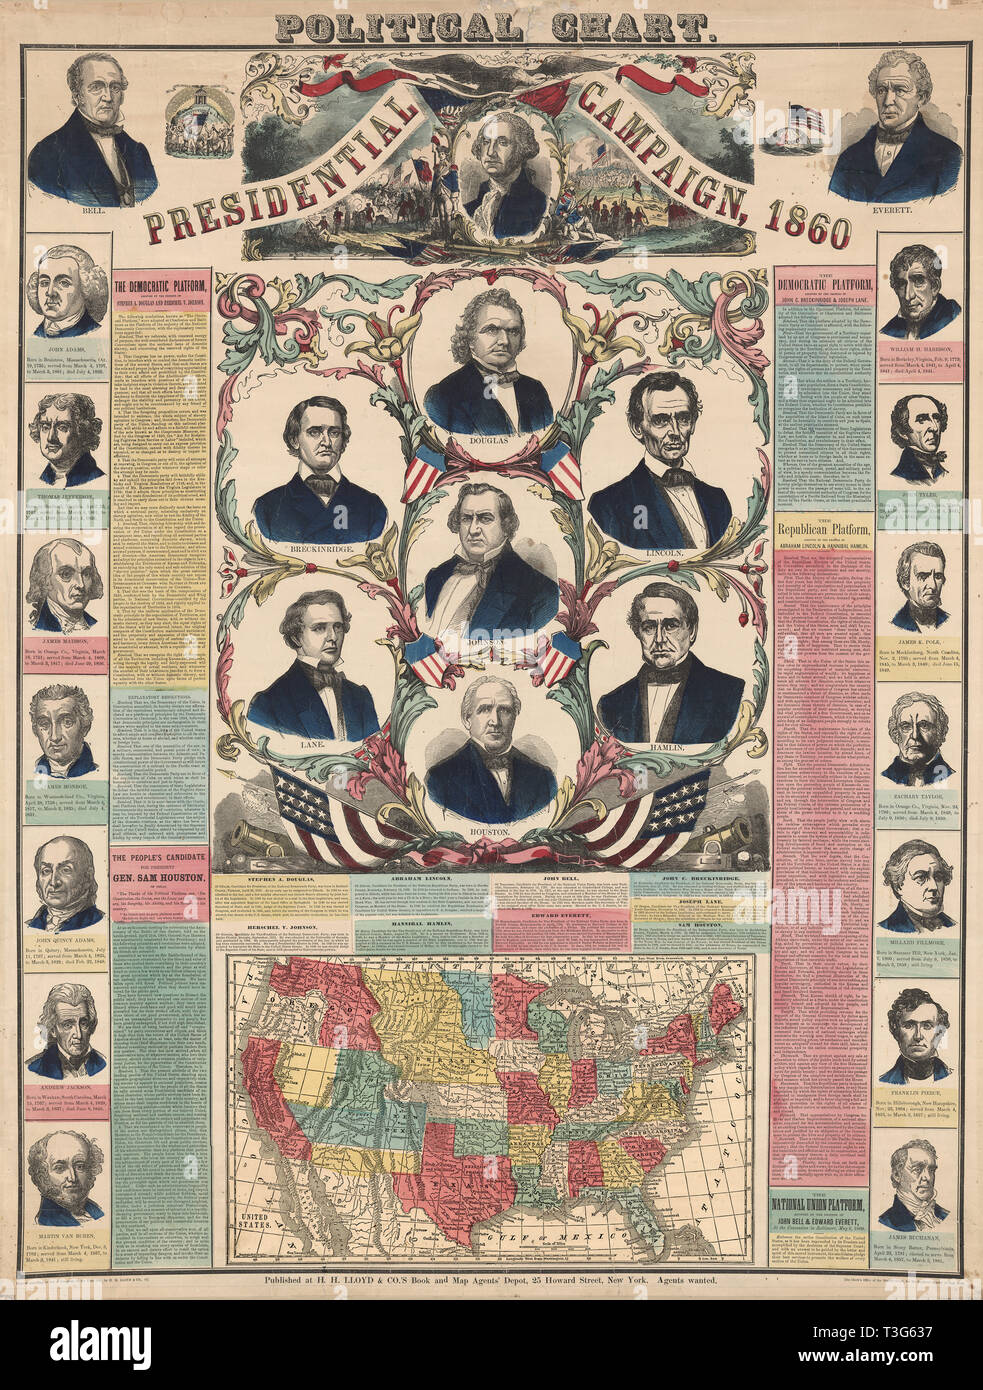 Political Chart, Presidential Campaign, 1860 Stock Photo